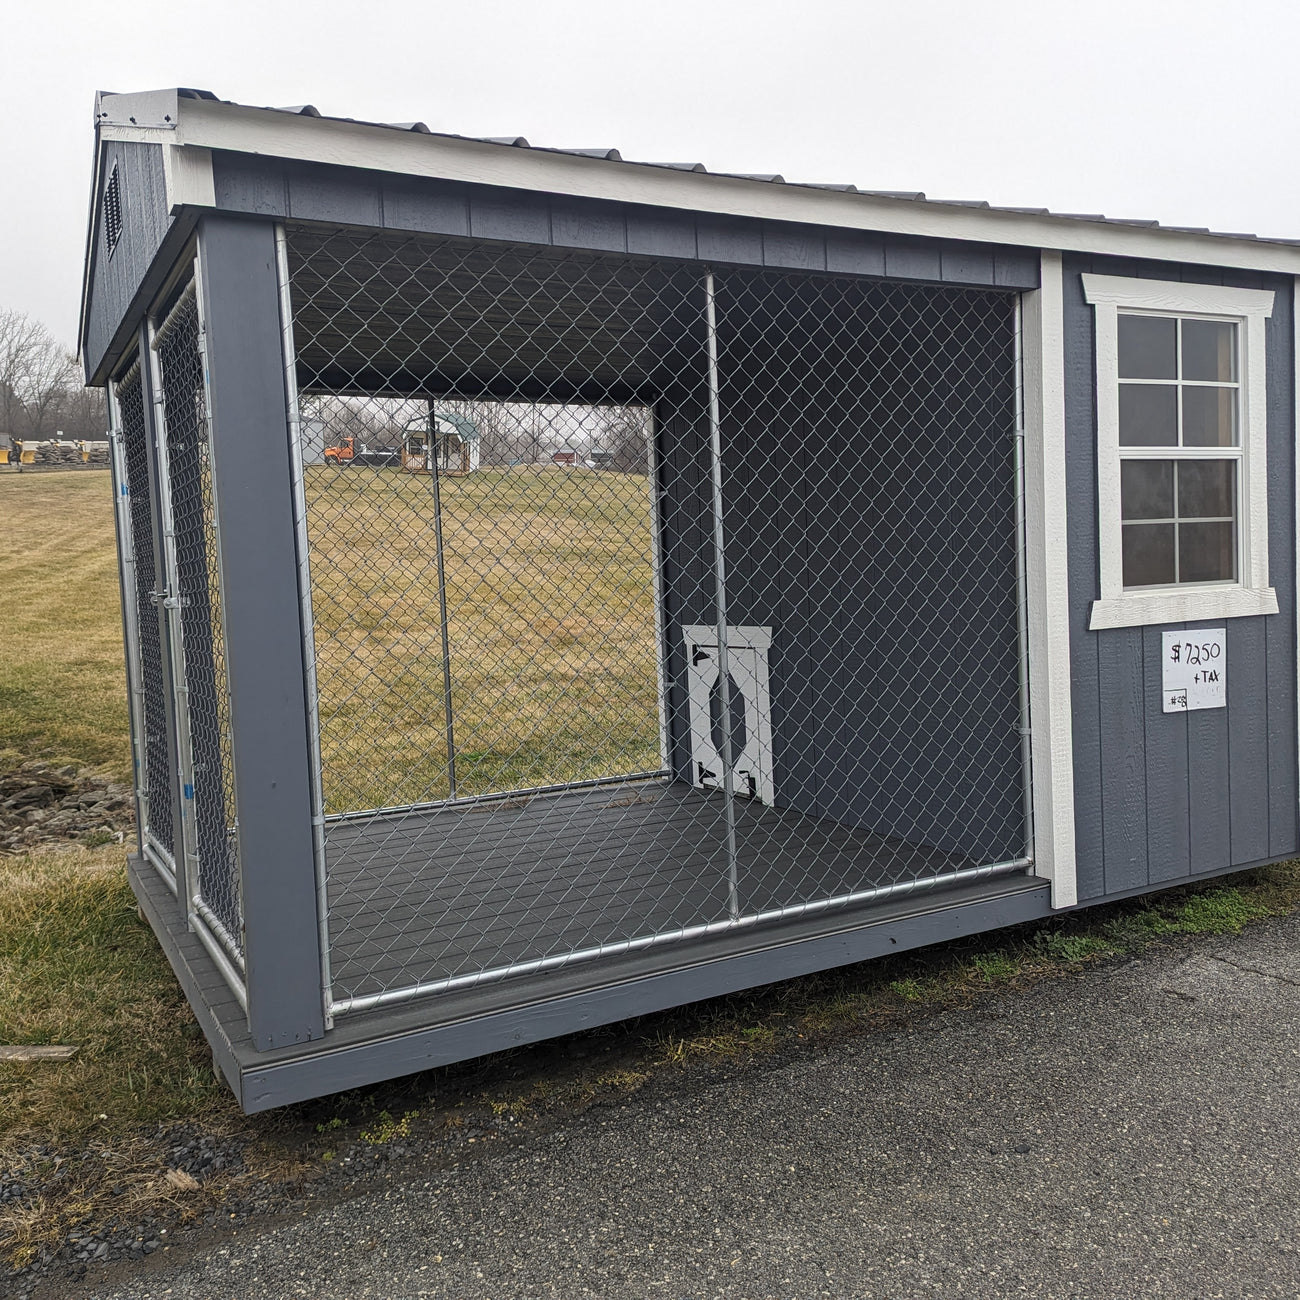 SHED - Painted Dog Kennel (8x12) (#28)